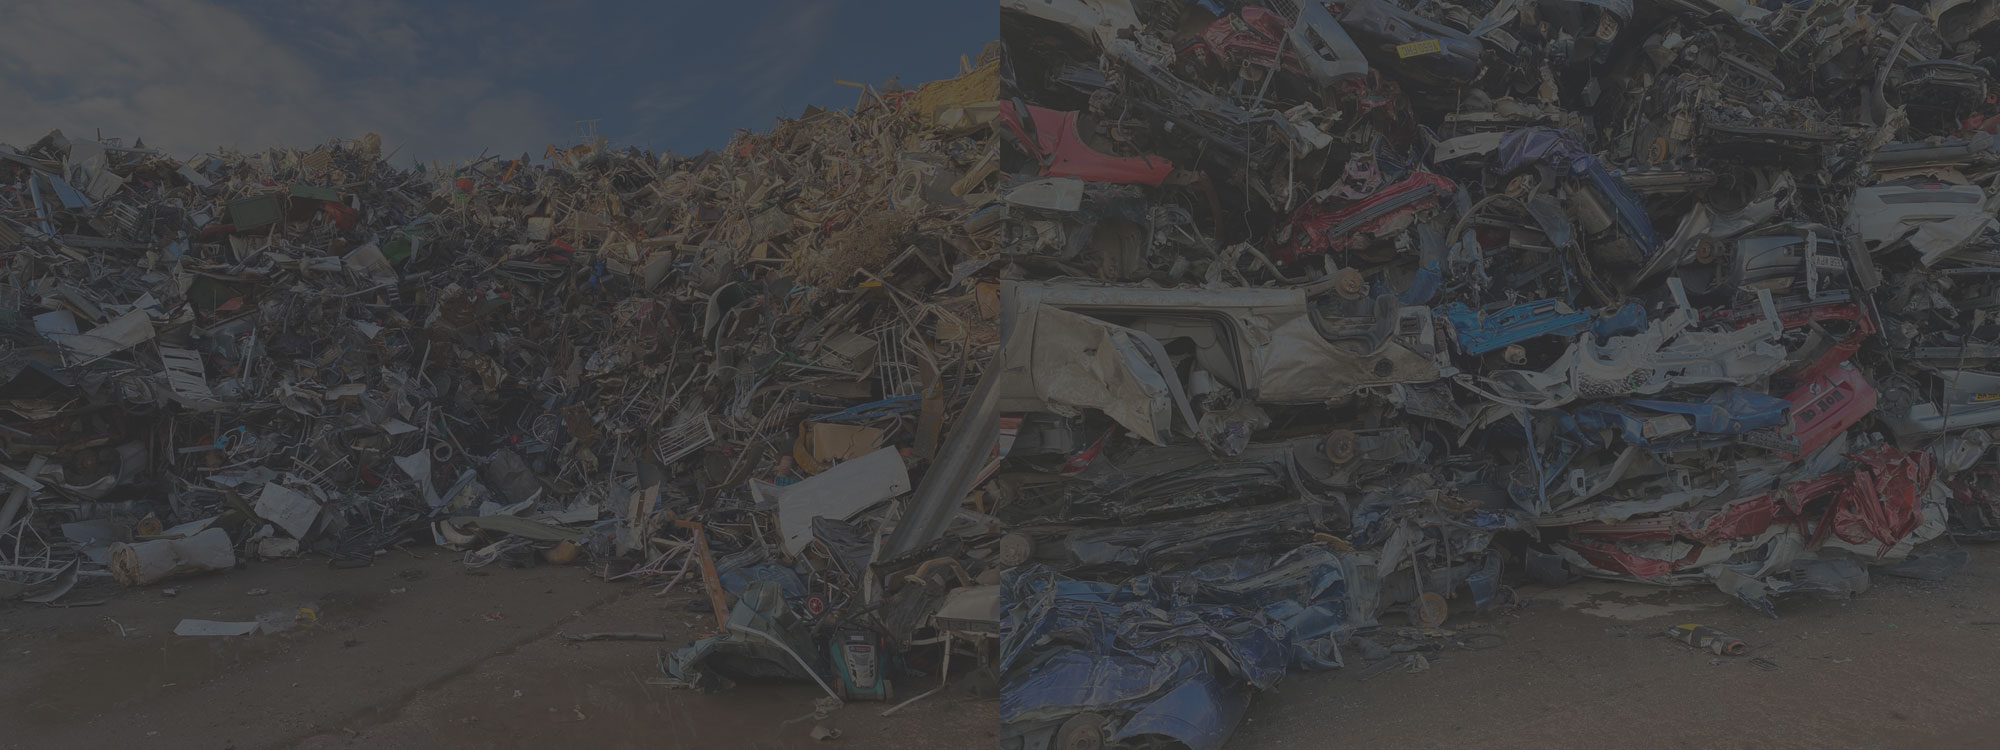 Scrap Metal Recycling for Daventry and surrounding areas